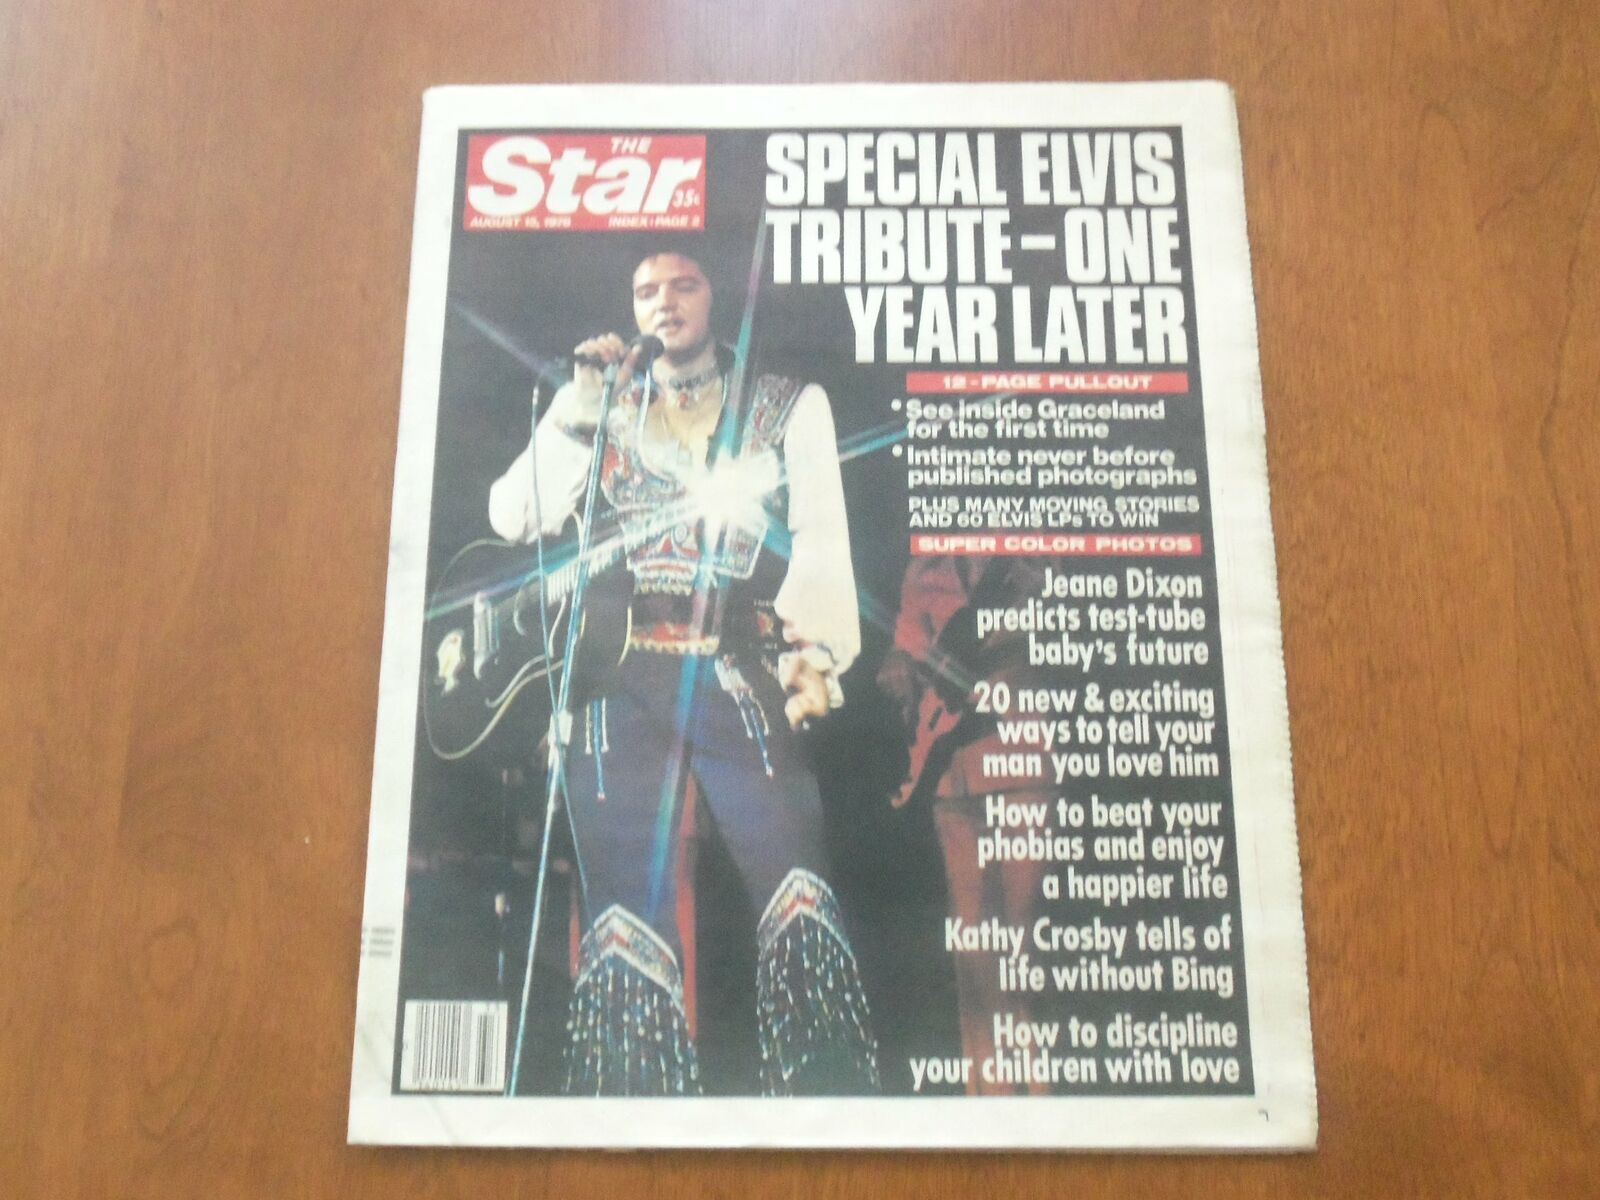 1978 AUGUST 15 THE STAR NEWSPAPER - ELVIS TRIBUTE - ONE YEAR LATER - NP 4704